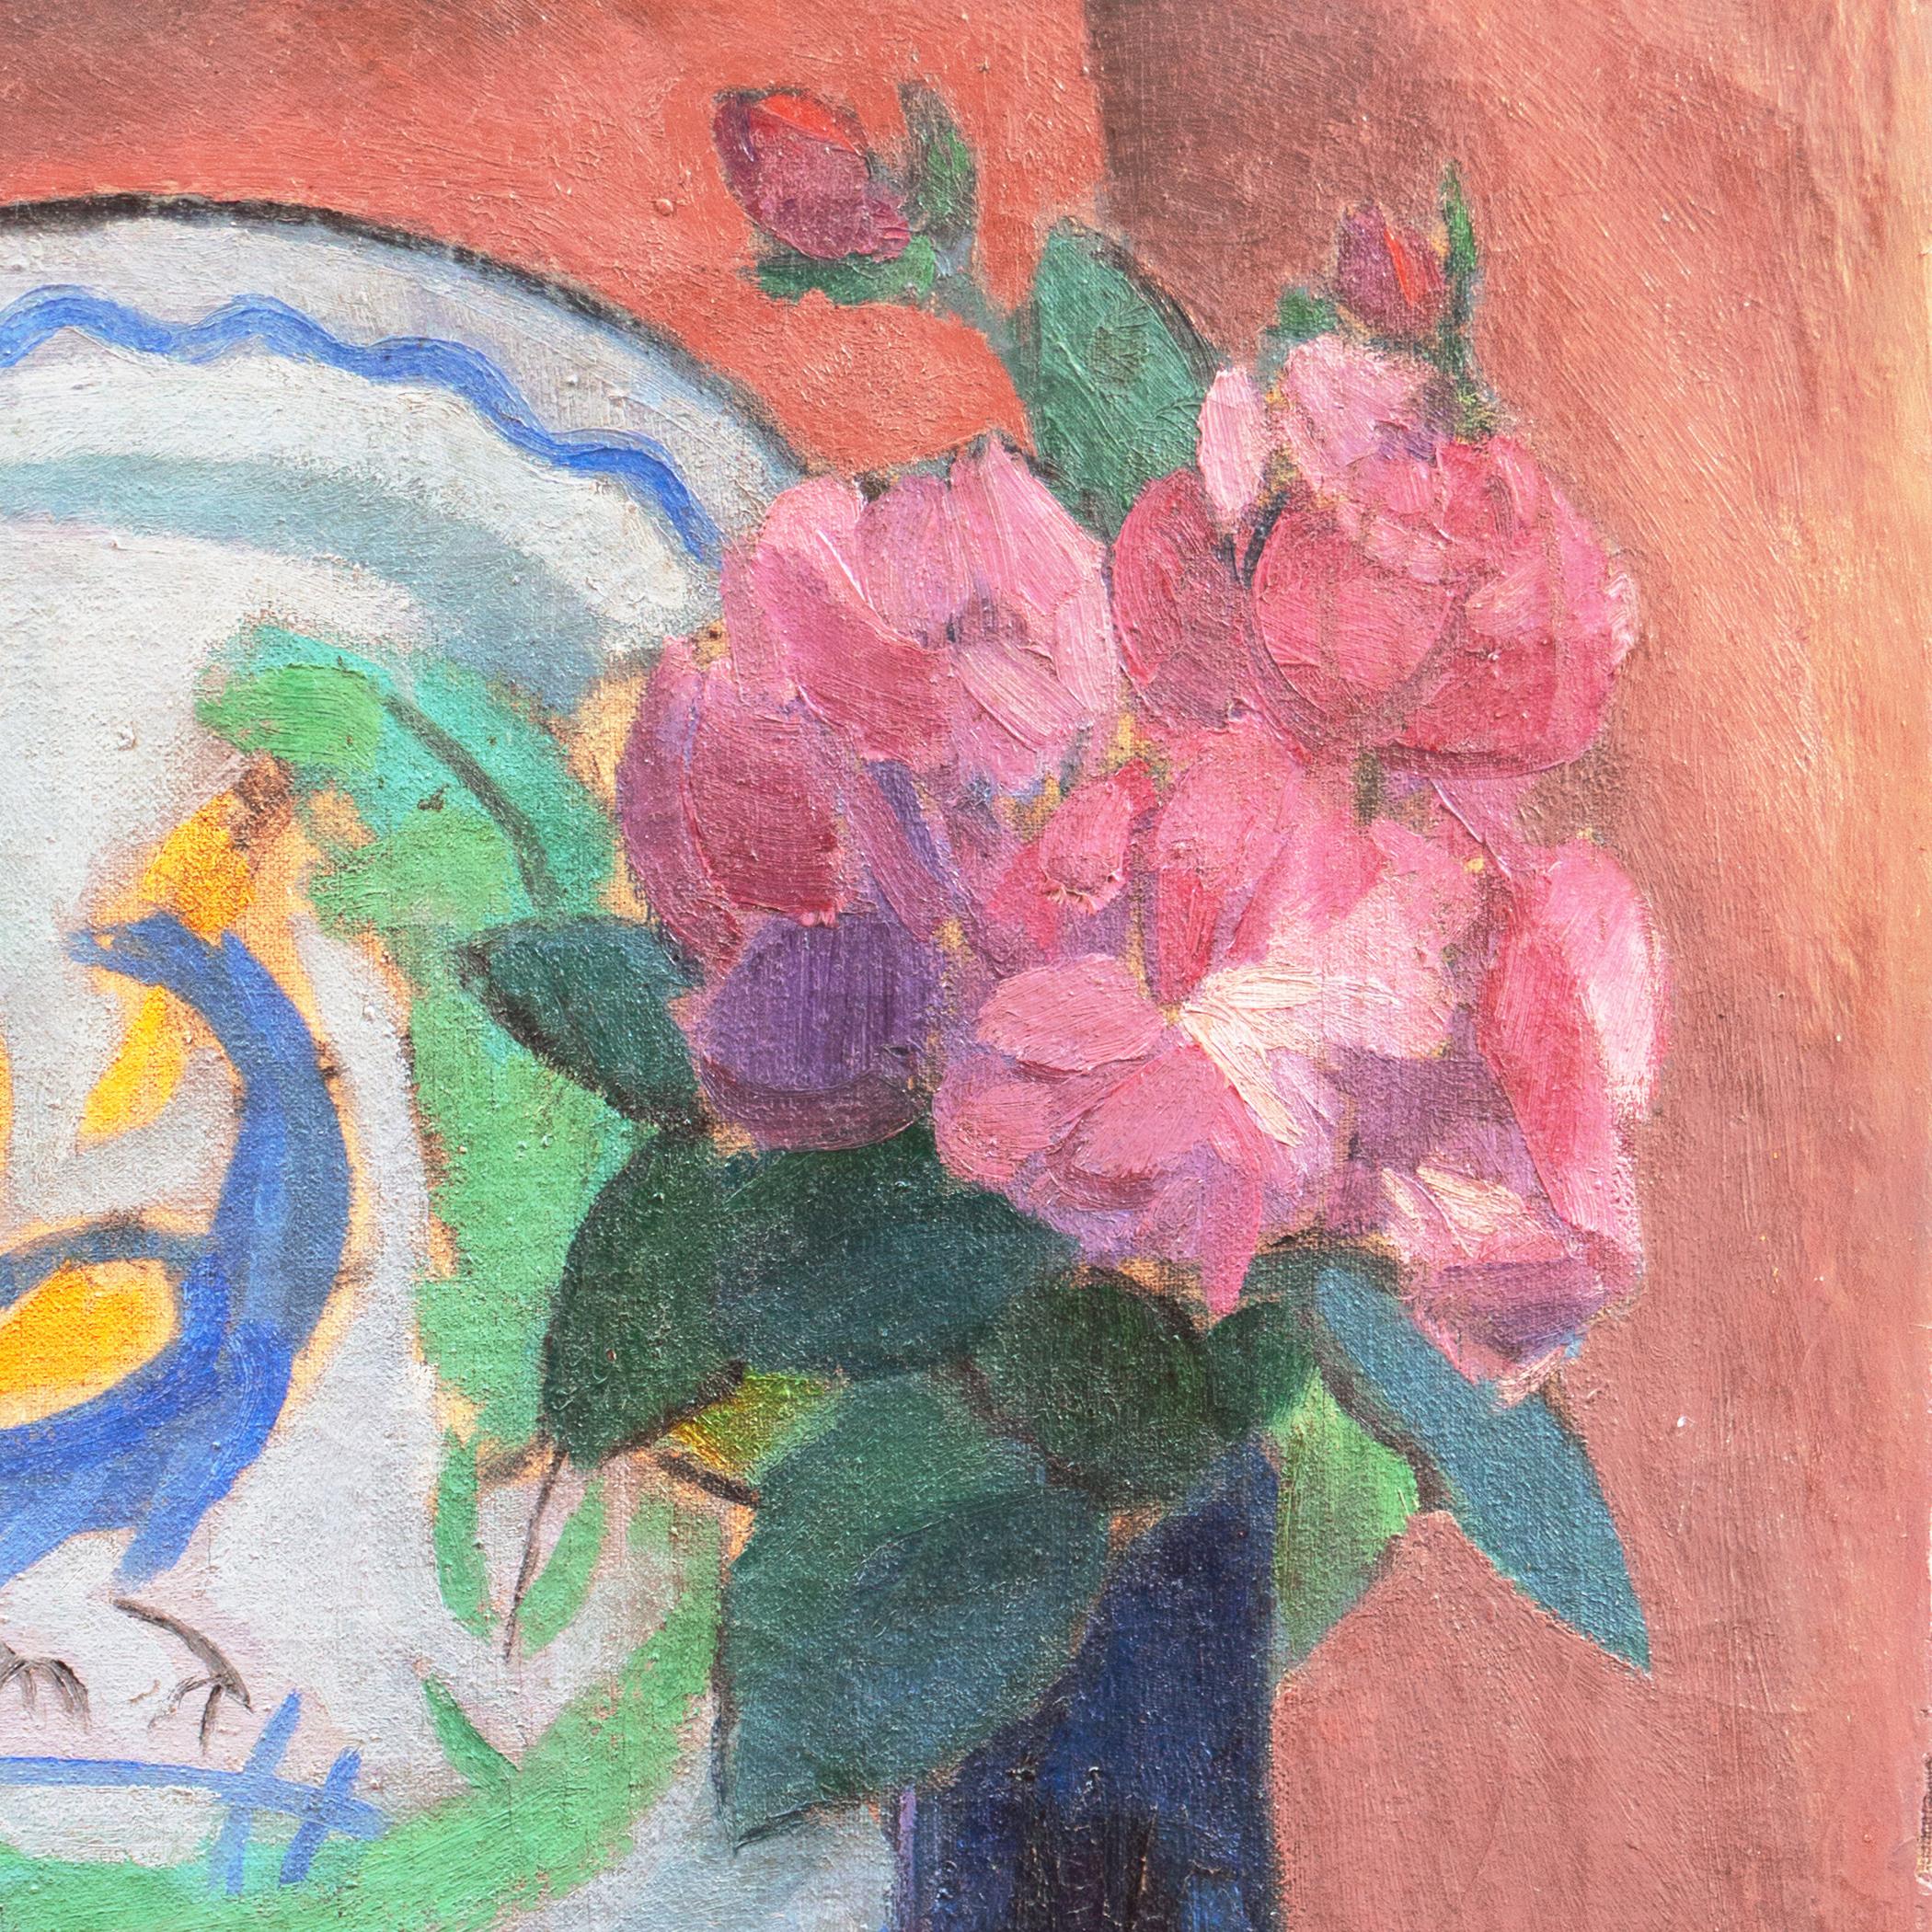 Signed lower right 'Jais' for Jais Nielsen (Danish, 1885-1961) and dated 1913. 

An early twentieth-century, oil still-life of pink dog-roses shown loosely arranged in a cobalt blue glass vase, set beside two Breton tin-glazed earthenware plates,